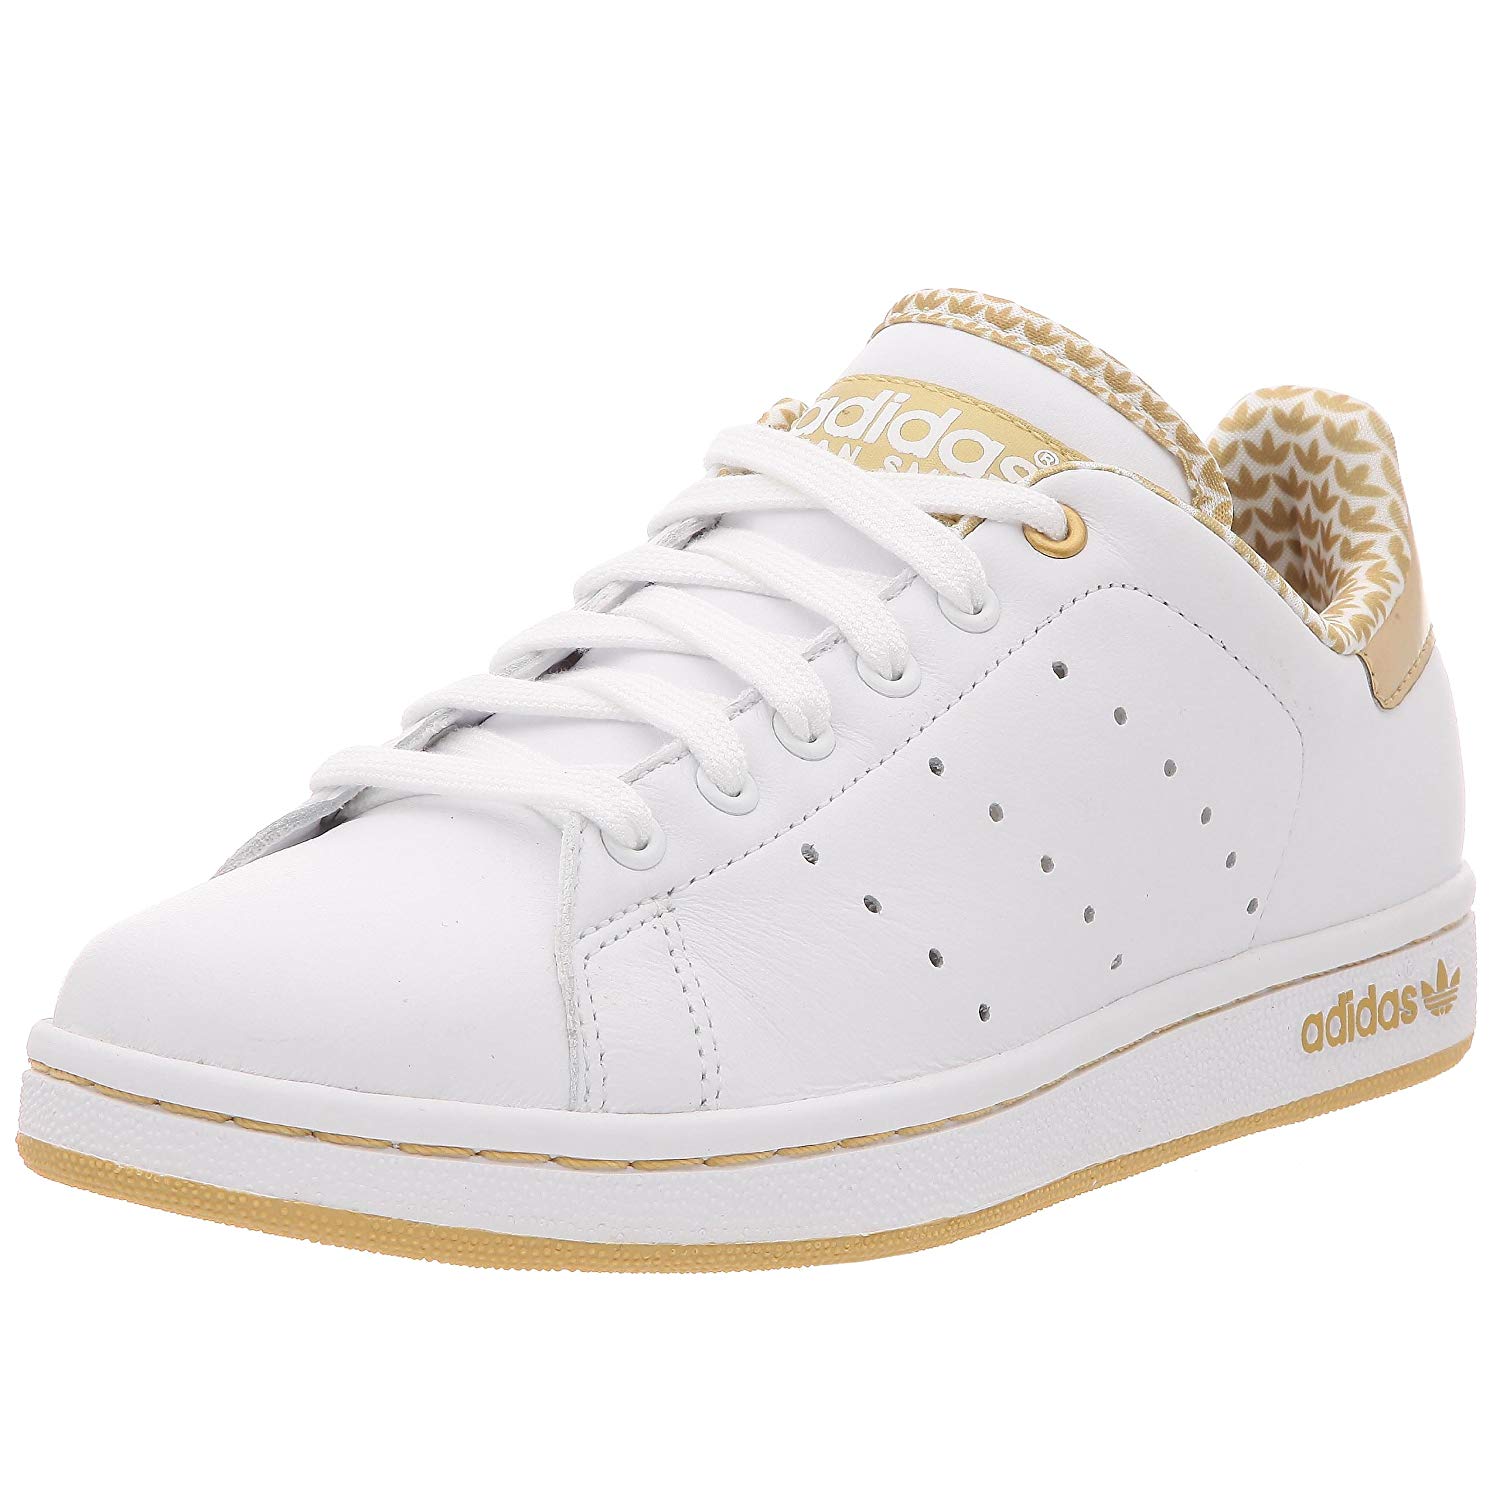 stan smith femme pas cher taille 40